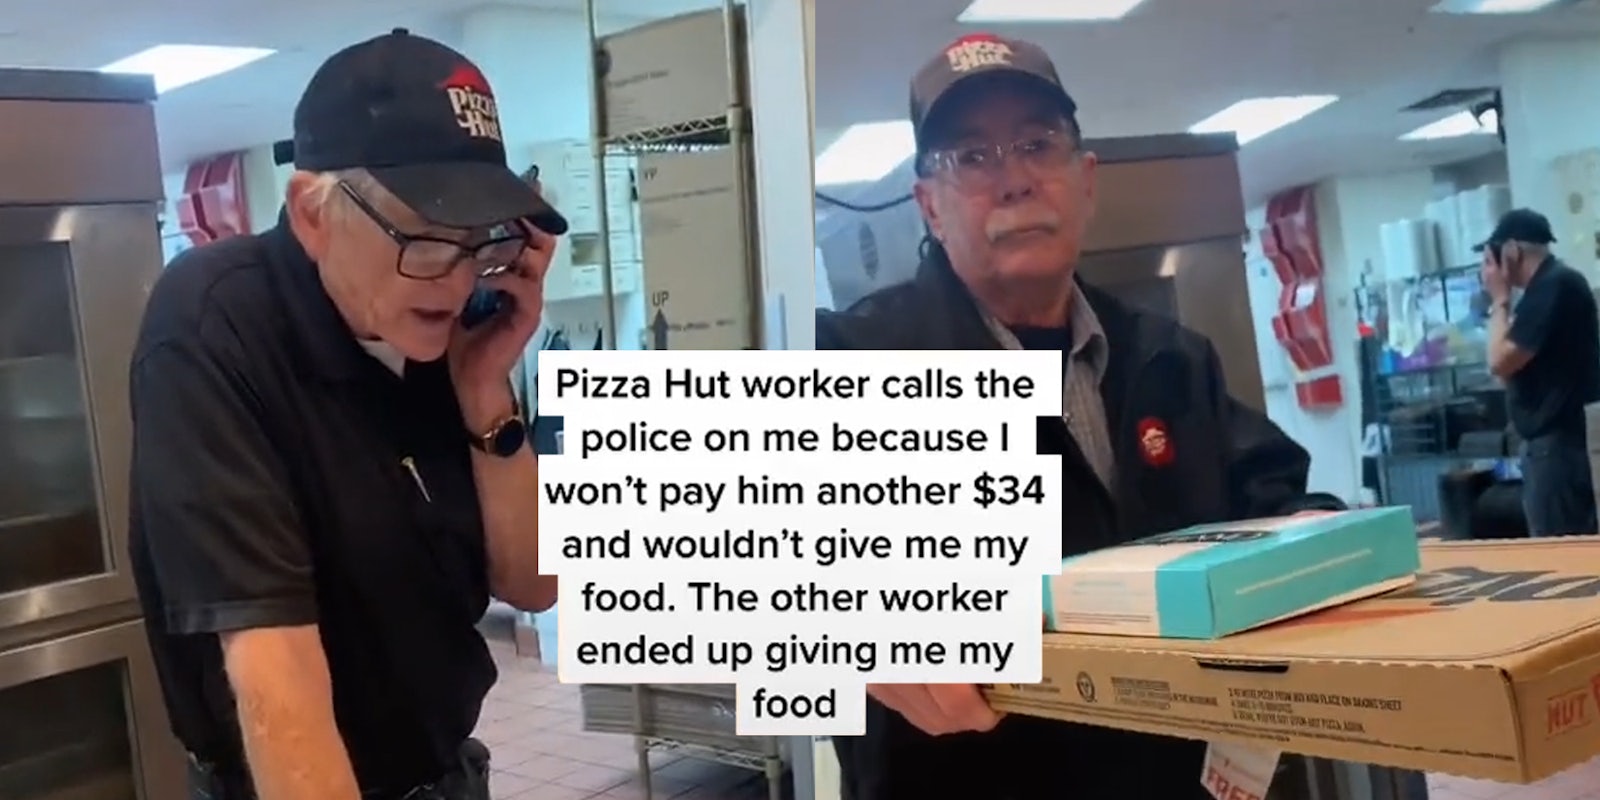 Pizza hut workers with caption 'Pizza Hut worker calls the police on me because I won't pay him another $34 and wouldn't give me my food. The other worker ended up giving me my food'